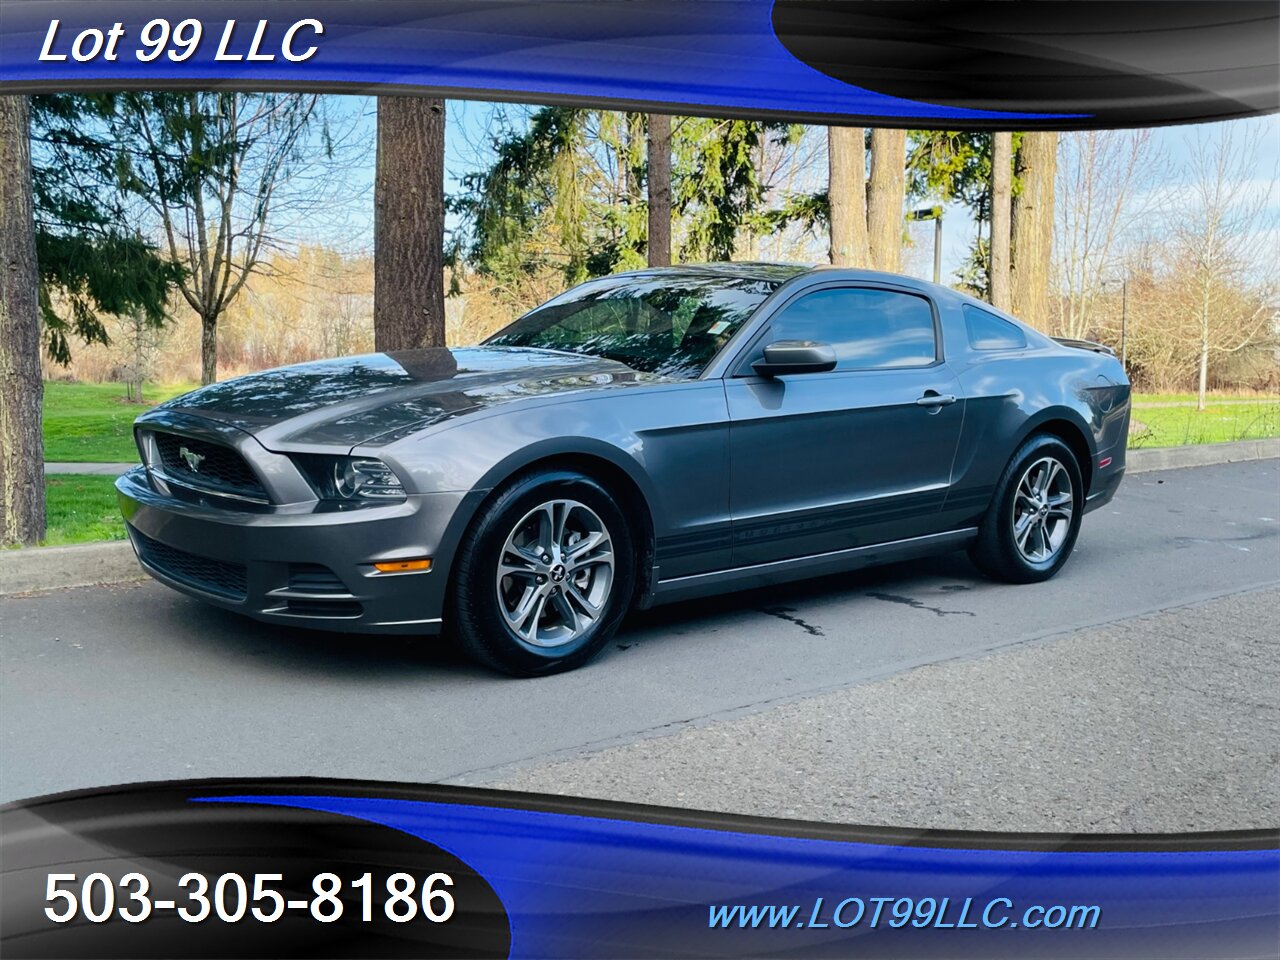 2014 Ford Mustang V6  3.7L V6 305hp  145k Miles Auto, 6-Spd SelectSh   - Photo 2 - Milwaukie, OR 97267